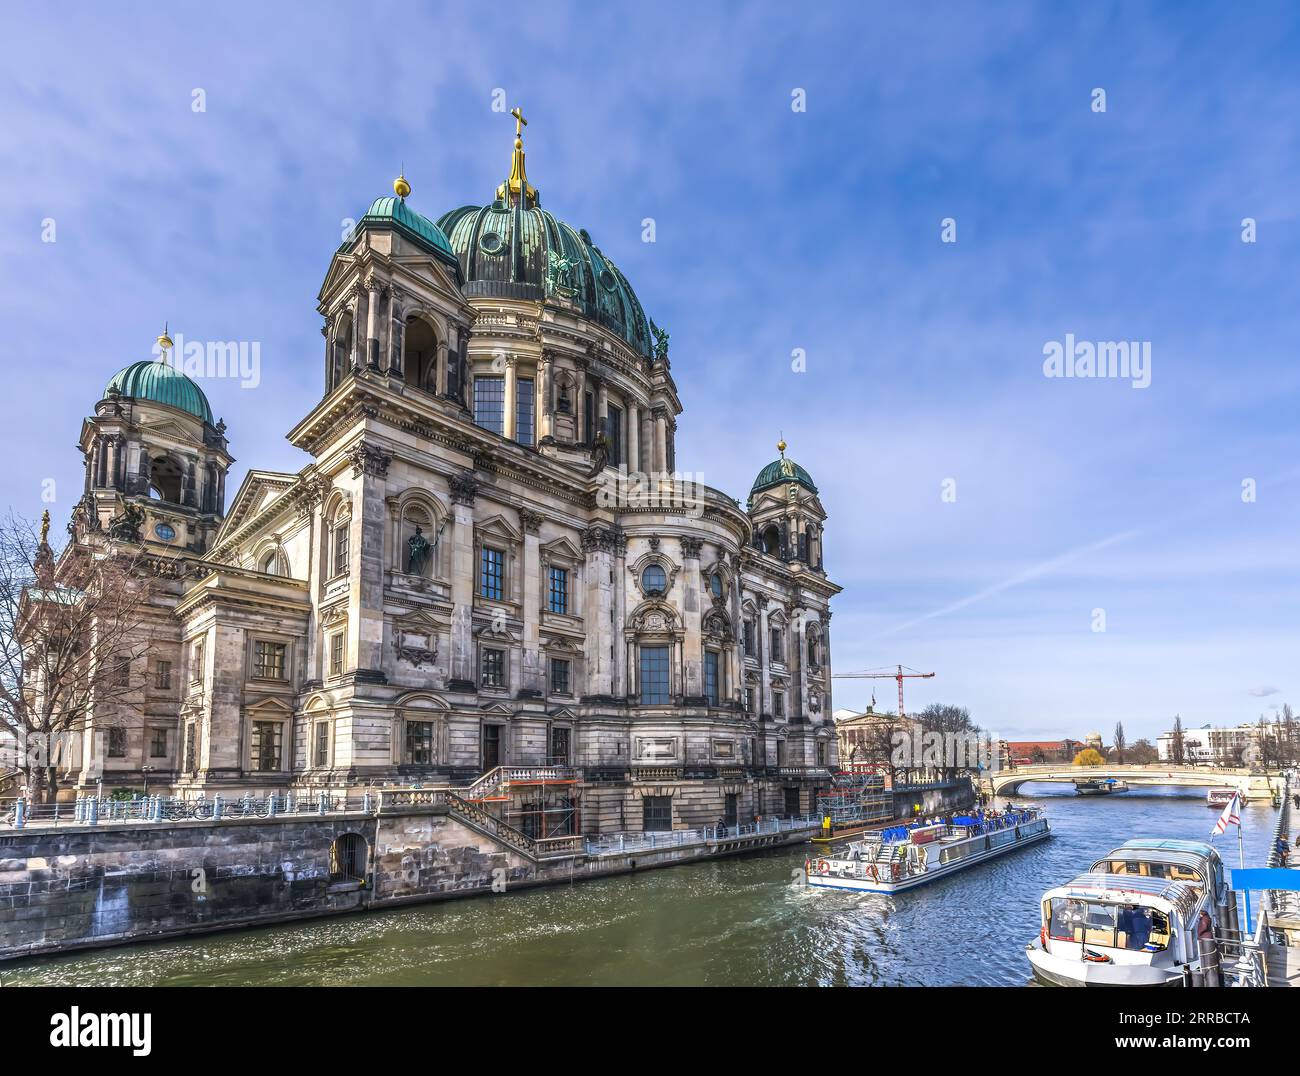 Spree River Tour Boats Berlin Cathedral Berliner Dom Berlin Germany. Largest Protestant Church in Germany. Built 1905, but church goes back to 1400s. Stock Photo